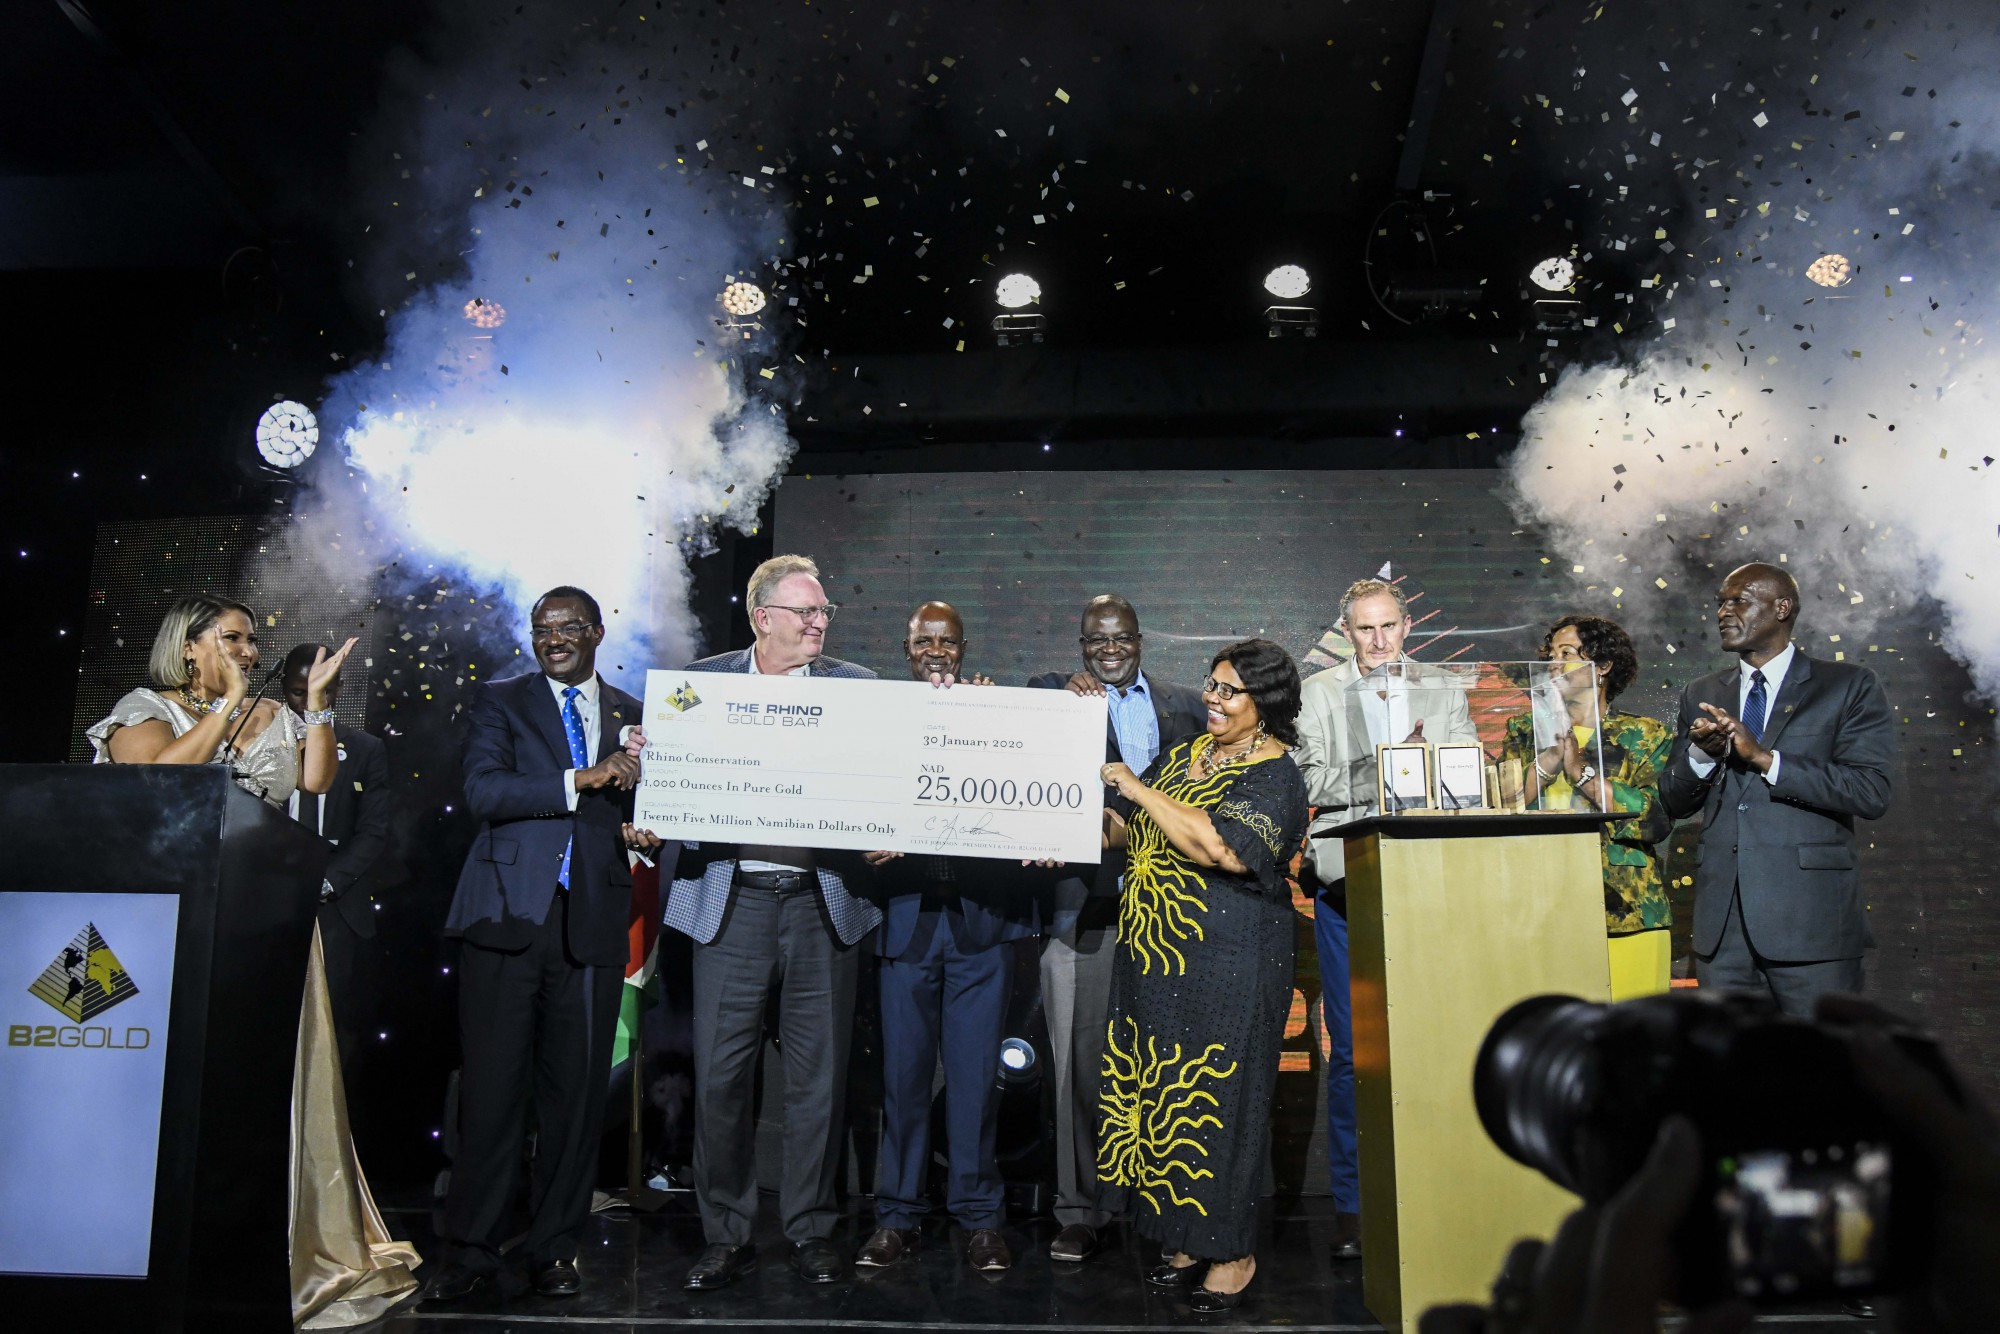 Clive Johnson (President, CEO & Director, B2Gold Corp.) handing a cheque of NAD $25,000,000 (approx. USD $1,500,000)  to various beneficiaries  From left to right: Dr. Leake Hangala ( Director, B2Gold Namibia Proprietary Limited), Clive Johnson, Simson Uri-Khob (CEO, Save the Rhino Trust), John Kasaona (Executive Director, Integrated Rural Development and Nature Conservation), Honorable Bernadette Jagger (Deputy Minister of Environment and Tourism), Mark Dawe (Country Manager and Managing Director – Namibia, B2Gold Corp.), Inge Zaamwani-Kamwi (Adviser to the President of the Republic of Namibia, Dr Hage Geingob) and Tom Alweendo (Minister of Mines and Energy)